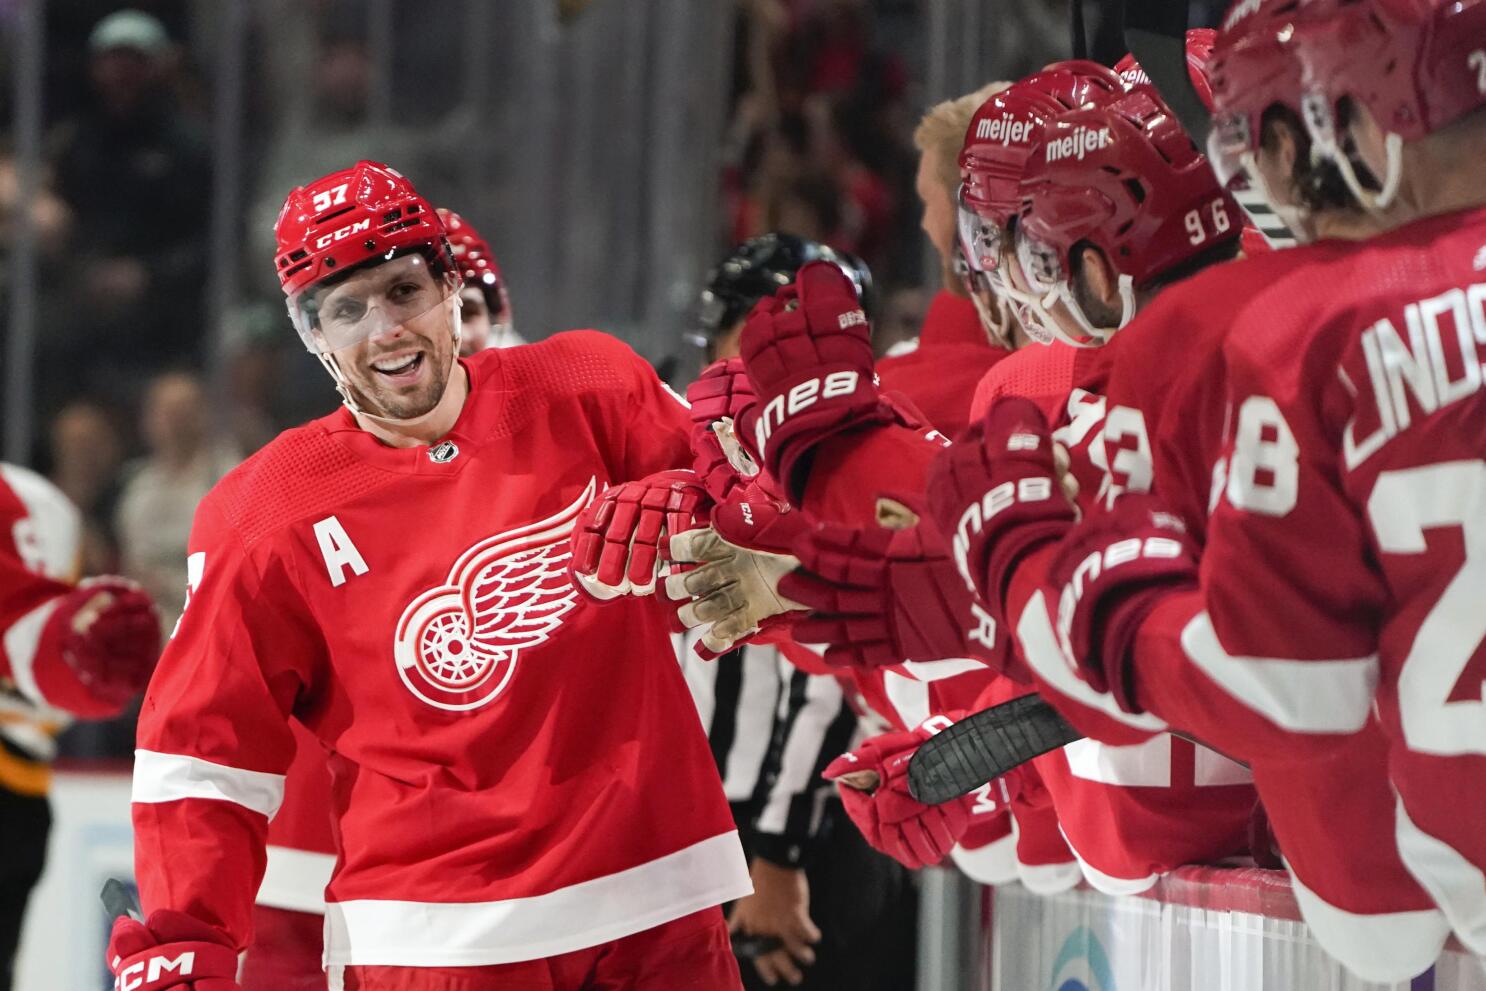 Detroit Red Wings - The Detroit Red Wings today recalled left wing